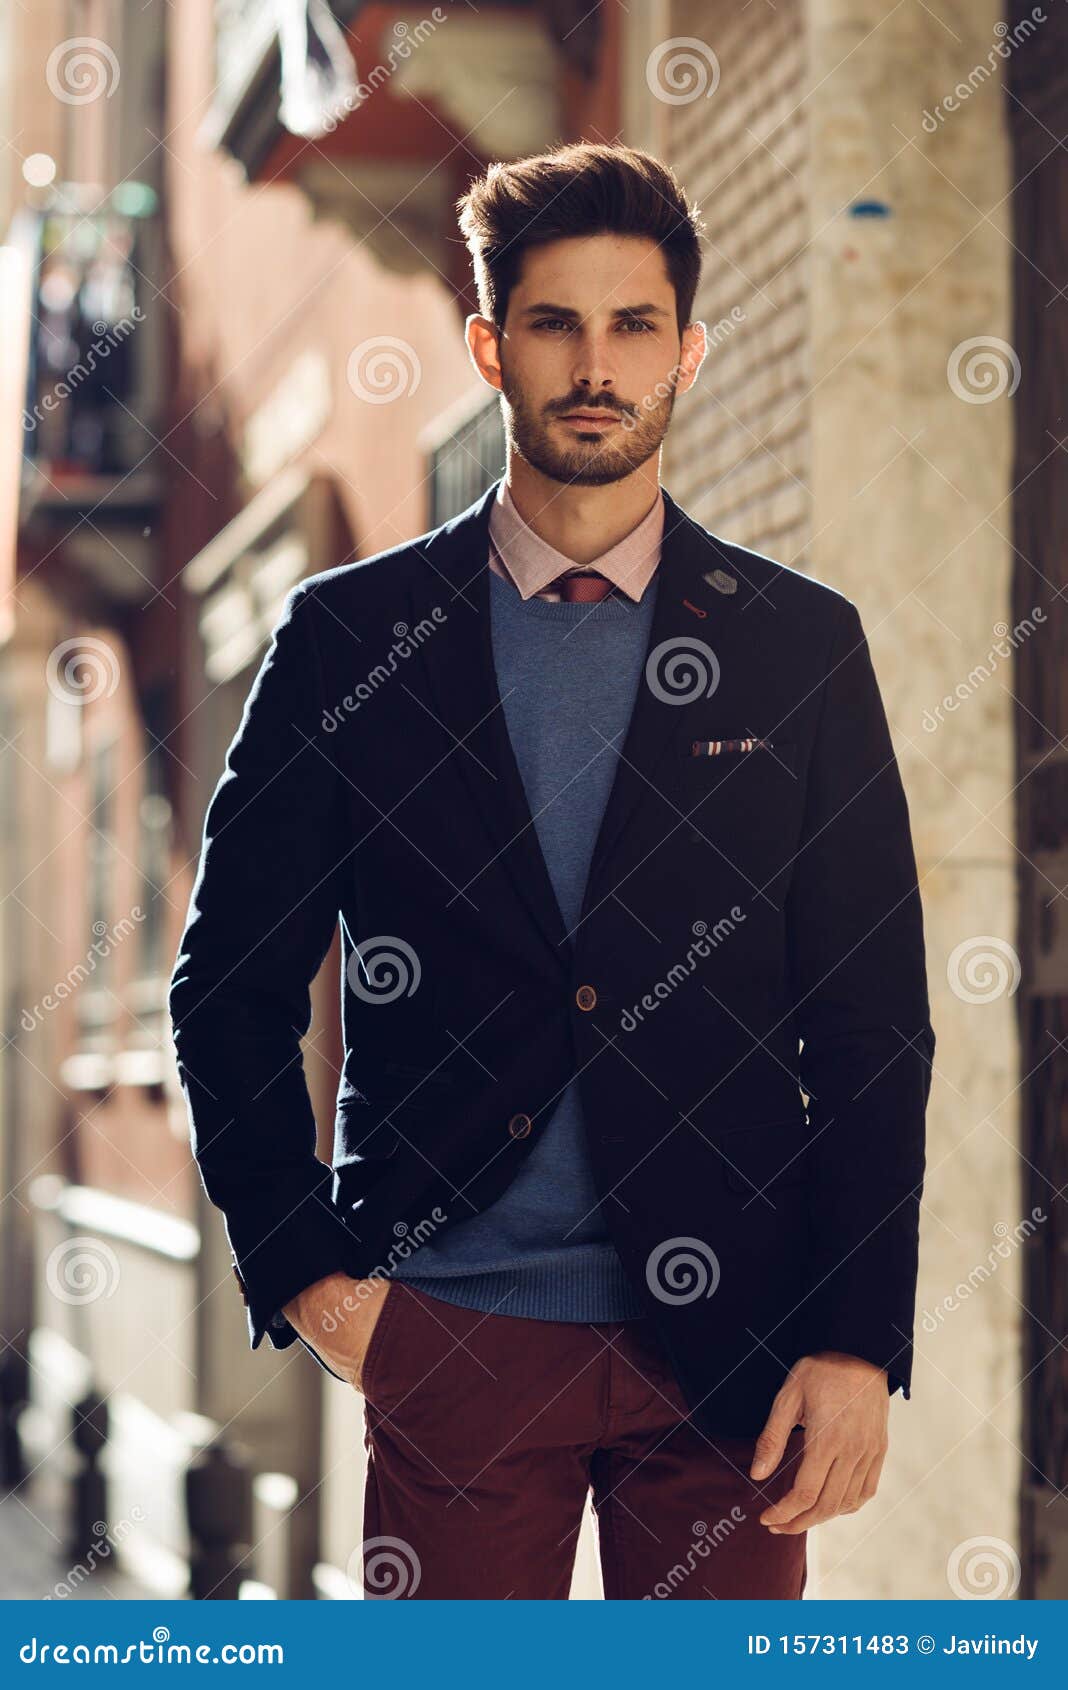 Attractive Man Wearing British Elegant Suit in the Street. Modern Hairstyle.  Stock Image - Image of streetstyle, stylish: 157311483